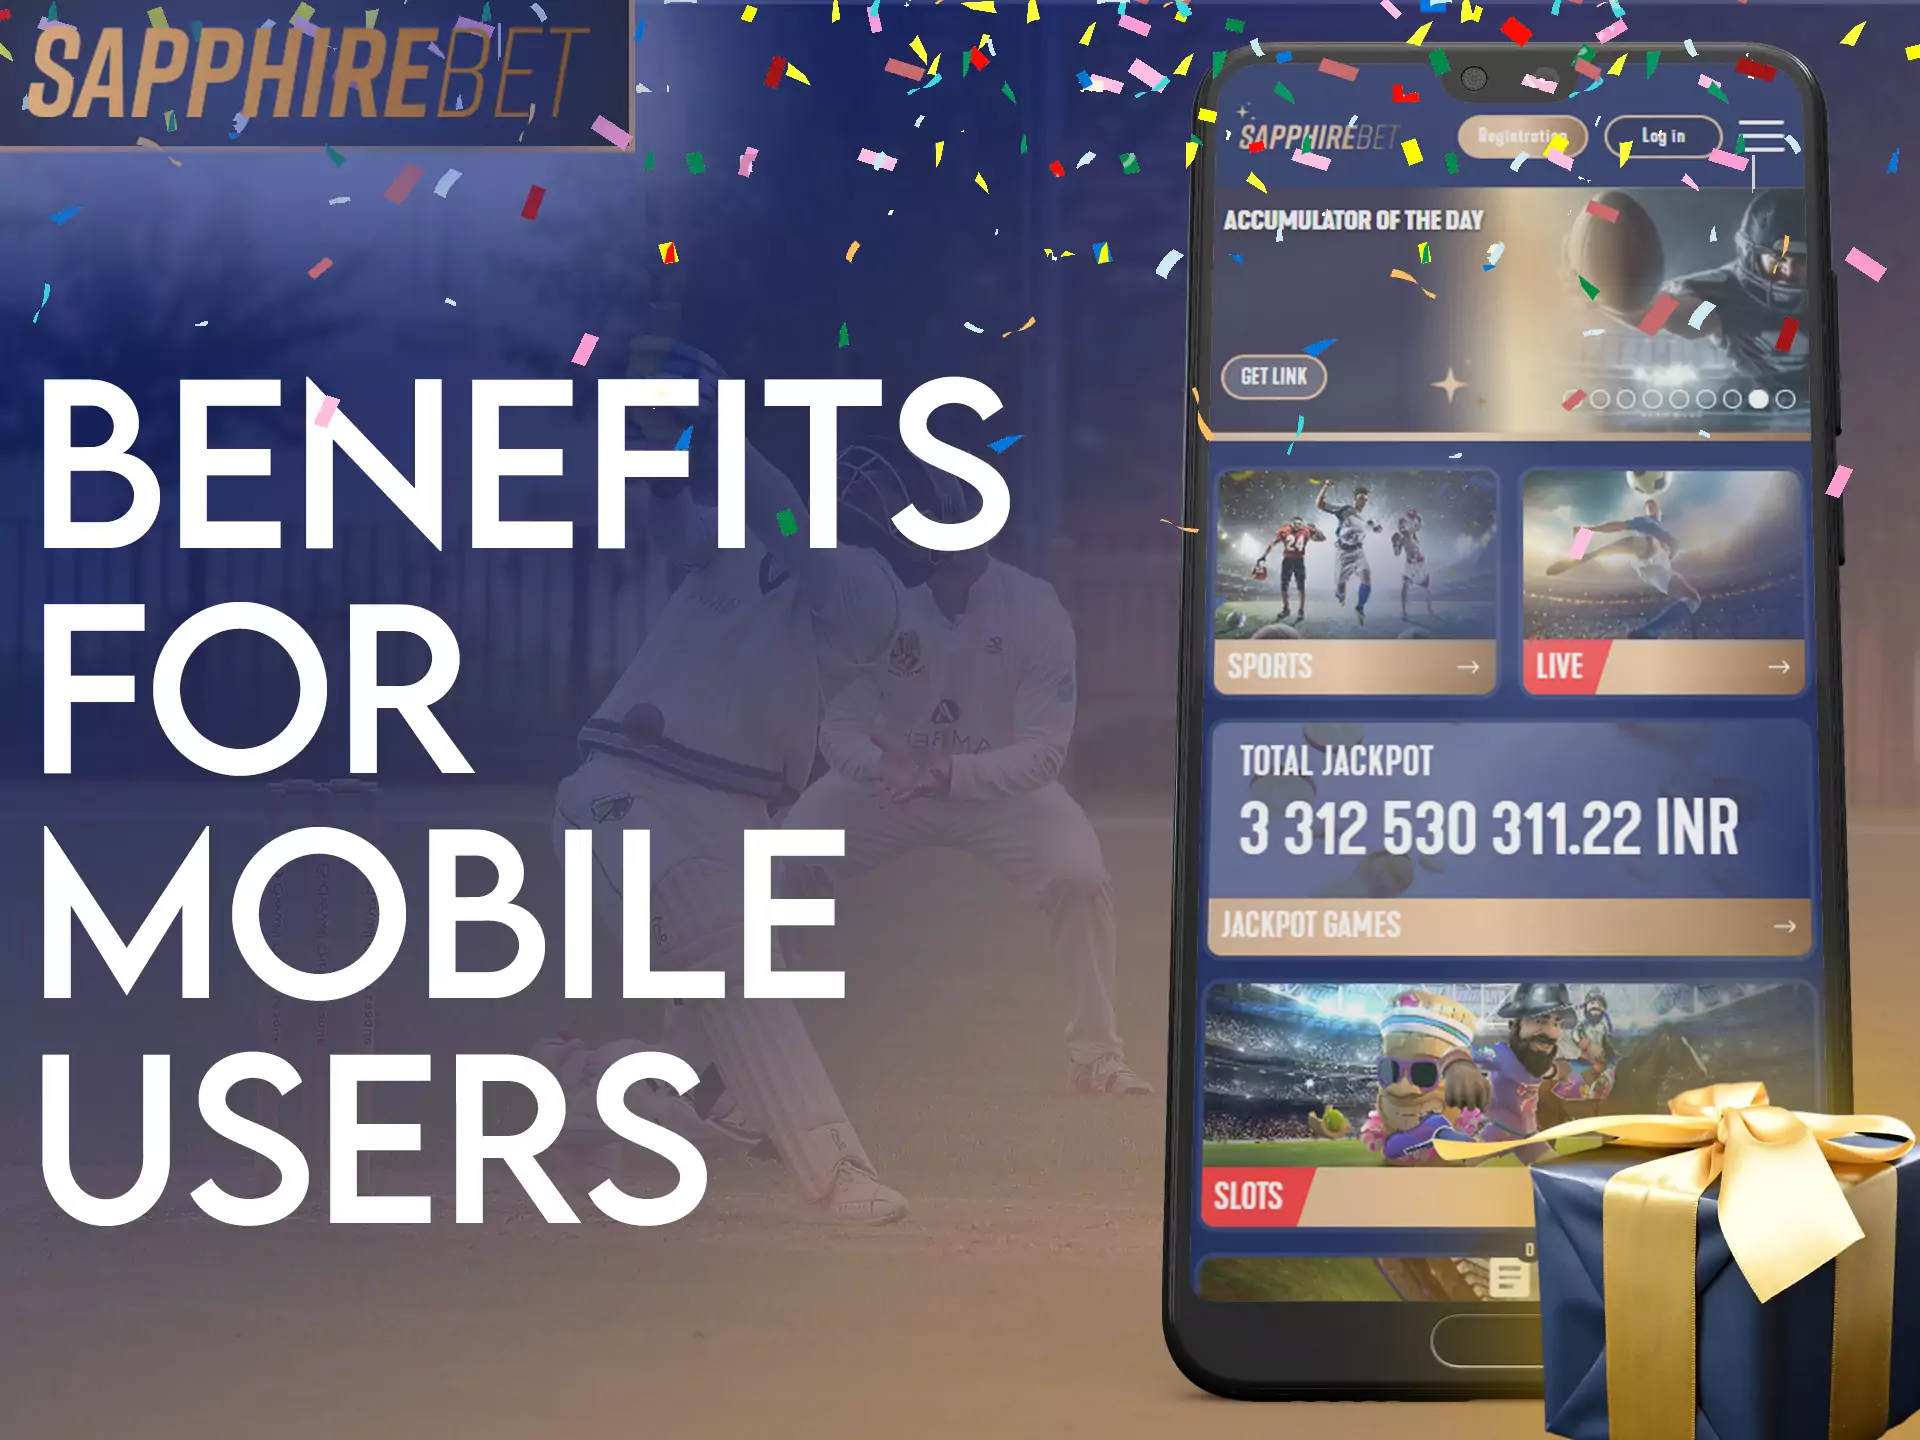 Sapphirebet offers interesting benefits to players who use the mobile app.